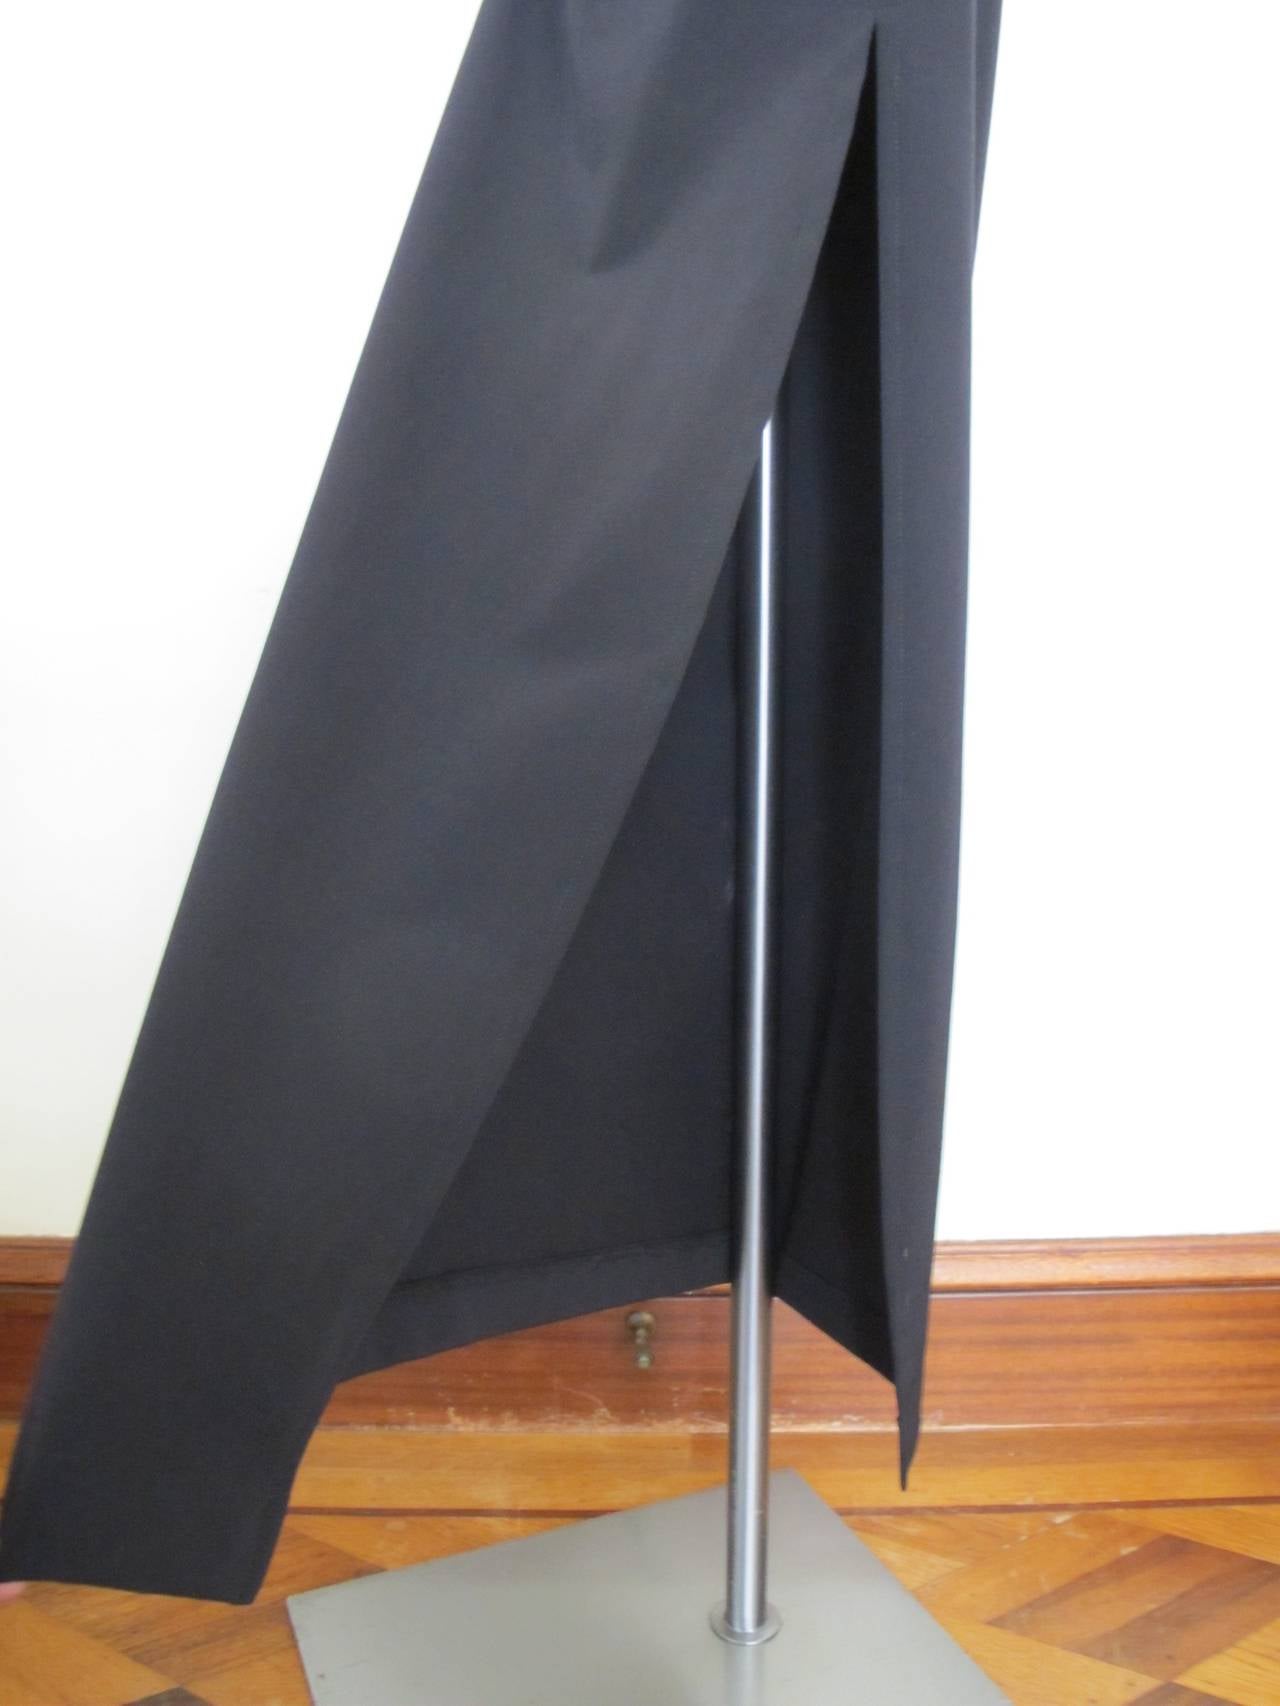 This elegant long skirt has a slit on the left of 27.25 inches. There is 8.5 inch band of fabric that serves as a corset on the waist and part of hip.